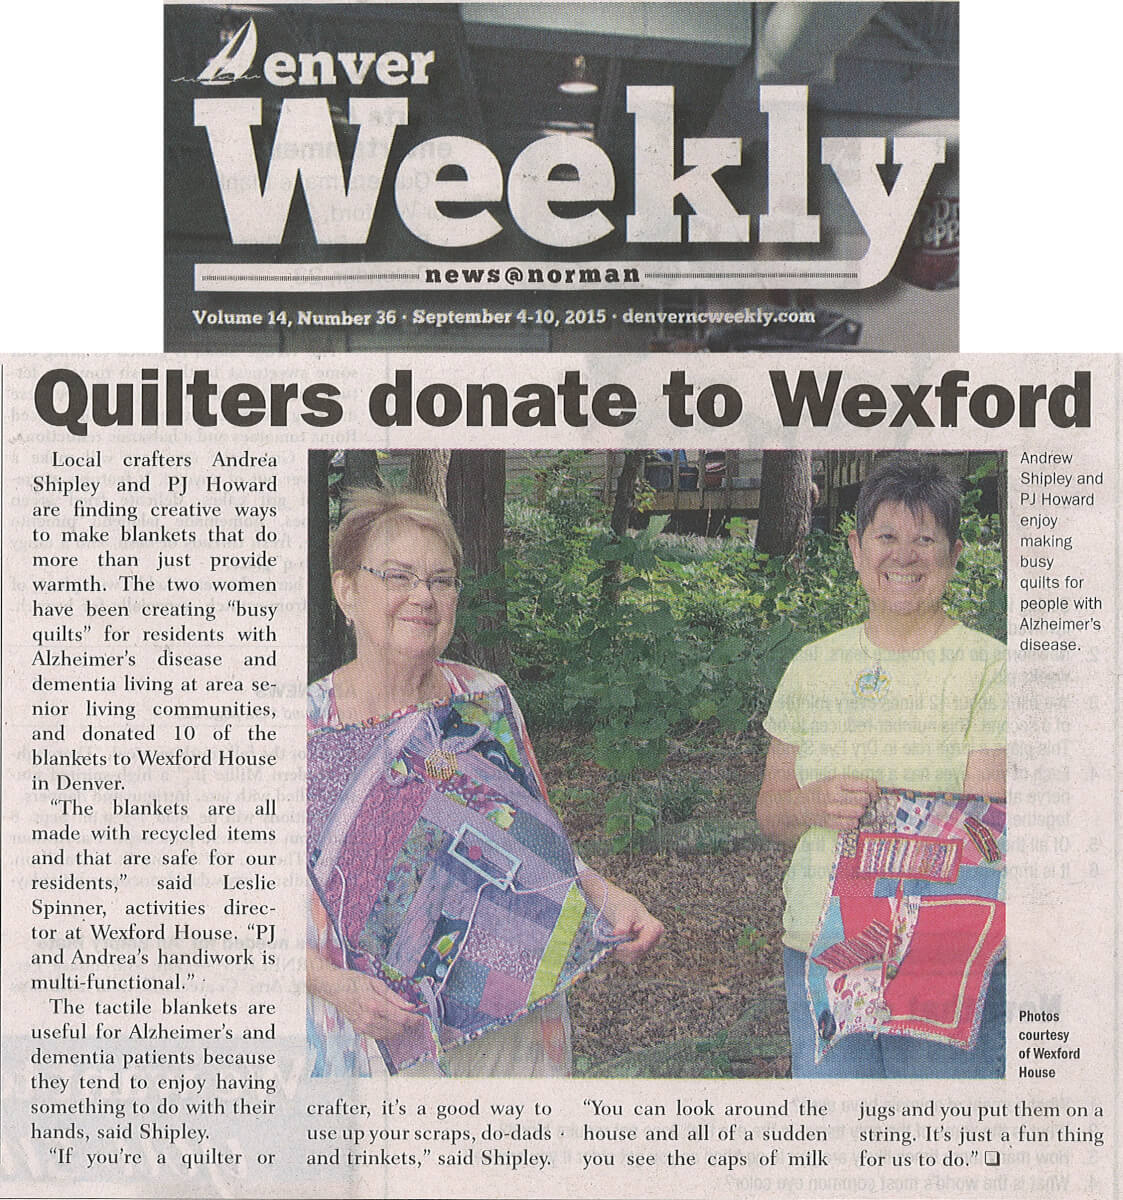 Wexford House receives Busy Blankets donation for residents with Alzheimers story in the Denver Weekly September 4-10, 2015